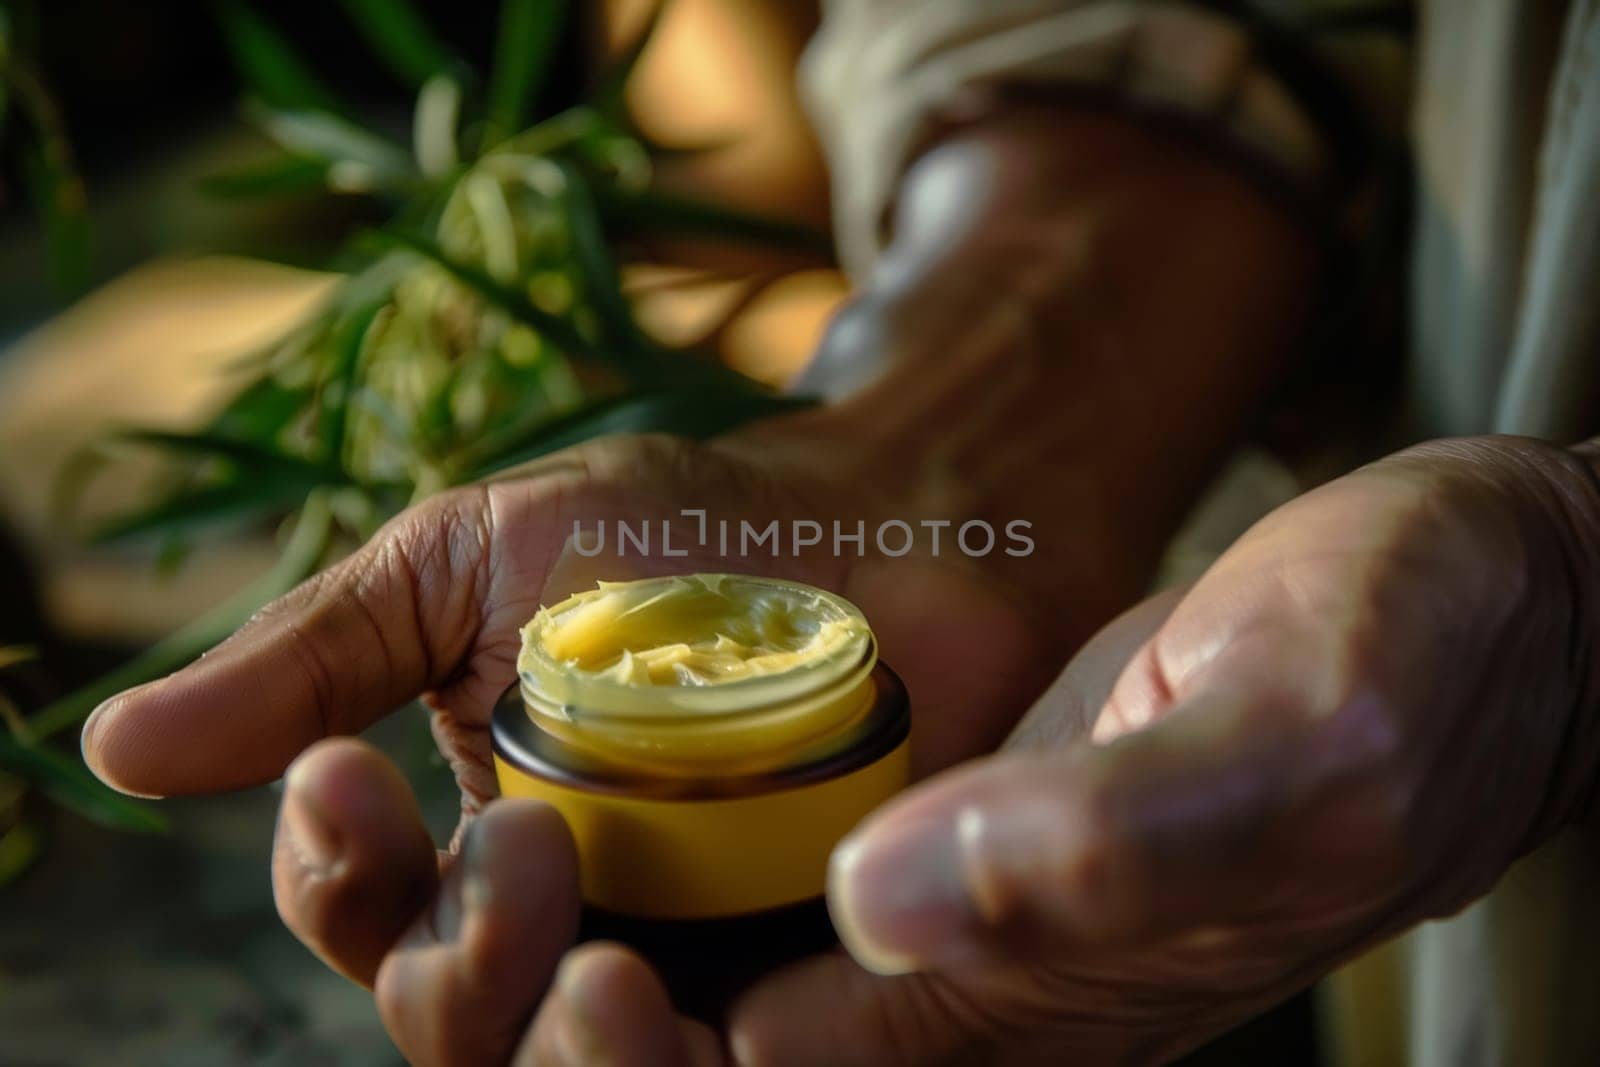 An intimate view of weathered hands applying a natural cream, conveying self-care and the nourishing properties of herbal products